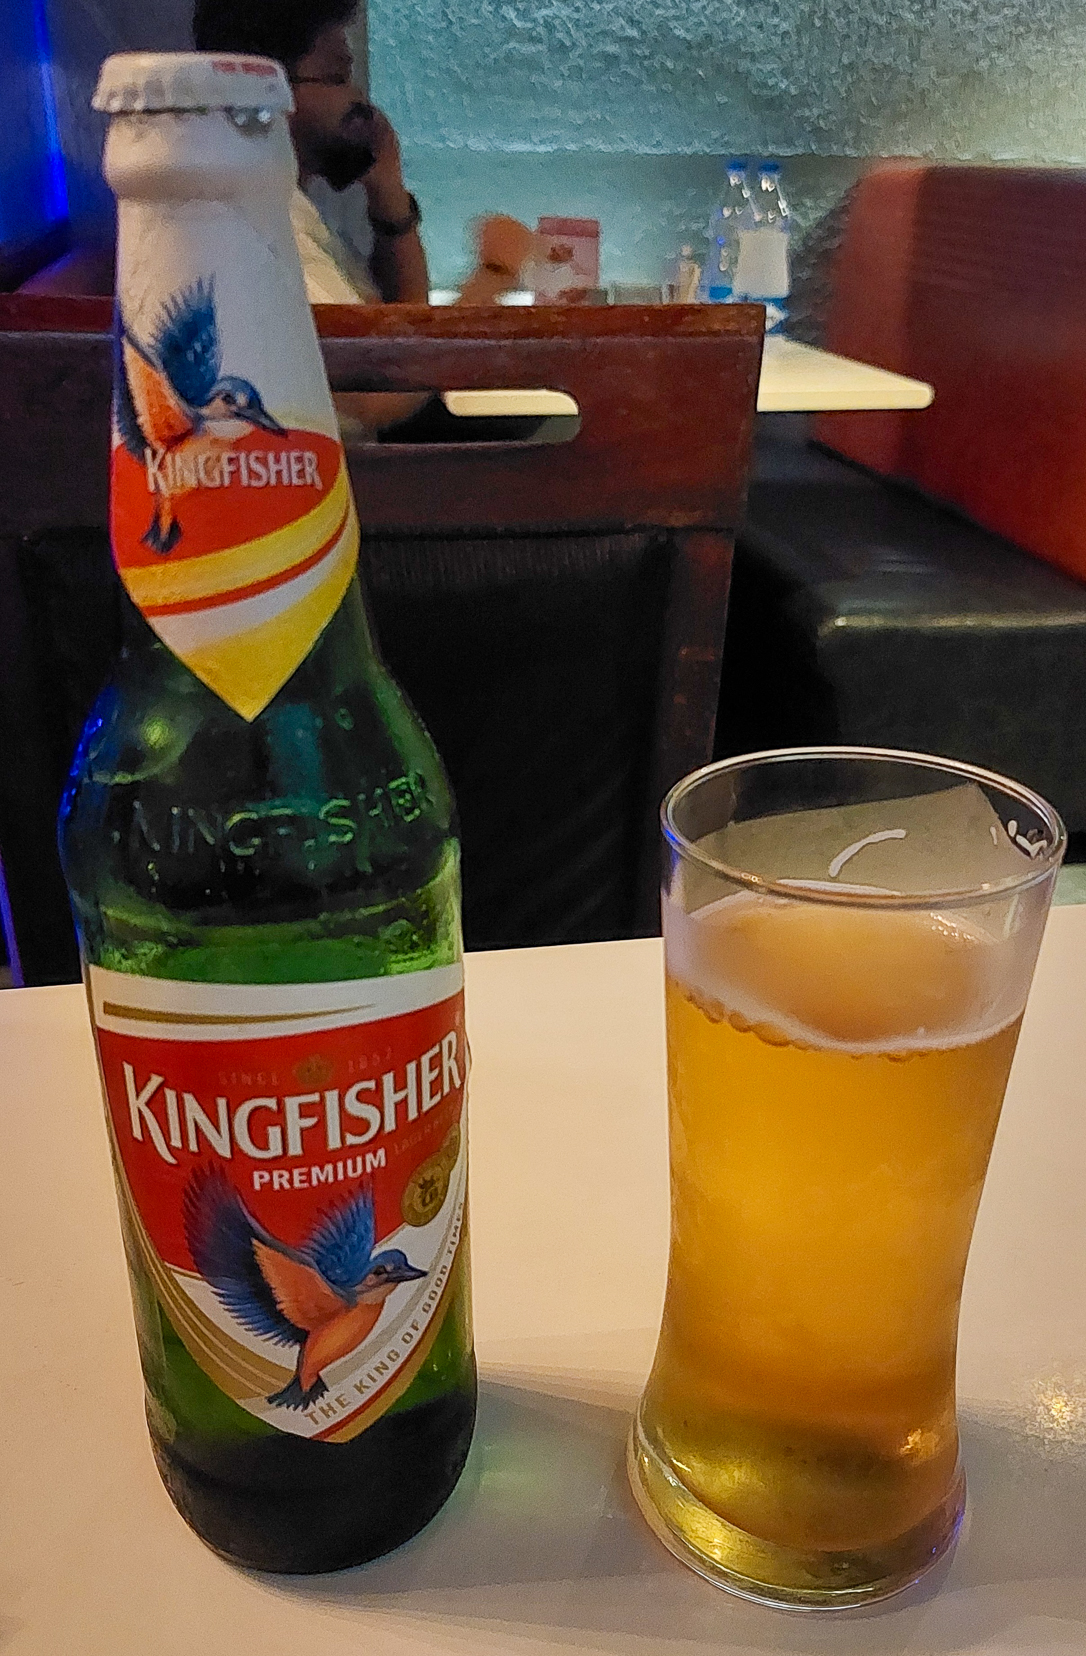 <span  class="uc_style_uc_tiles_grid_image_elementor_uc_items_attribute_title" style="color:#ffffff;">Indian local beer: the 'Kingfisher'</span>